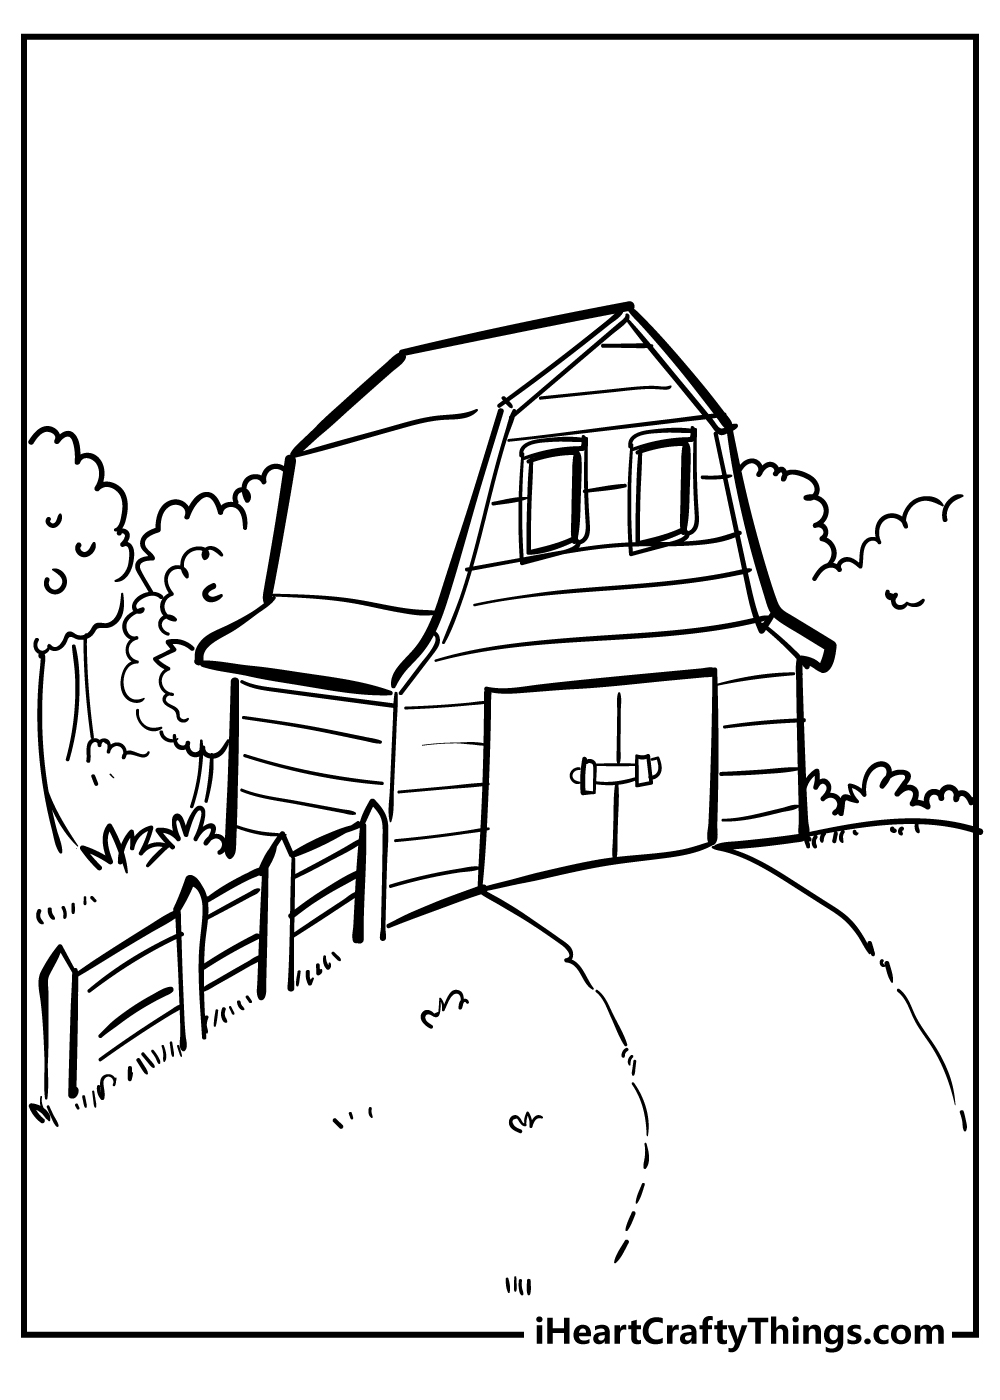 Barn coloring pages free printables